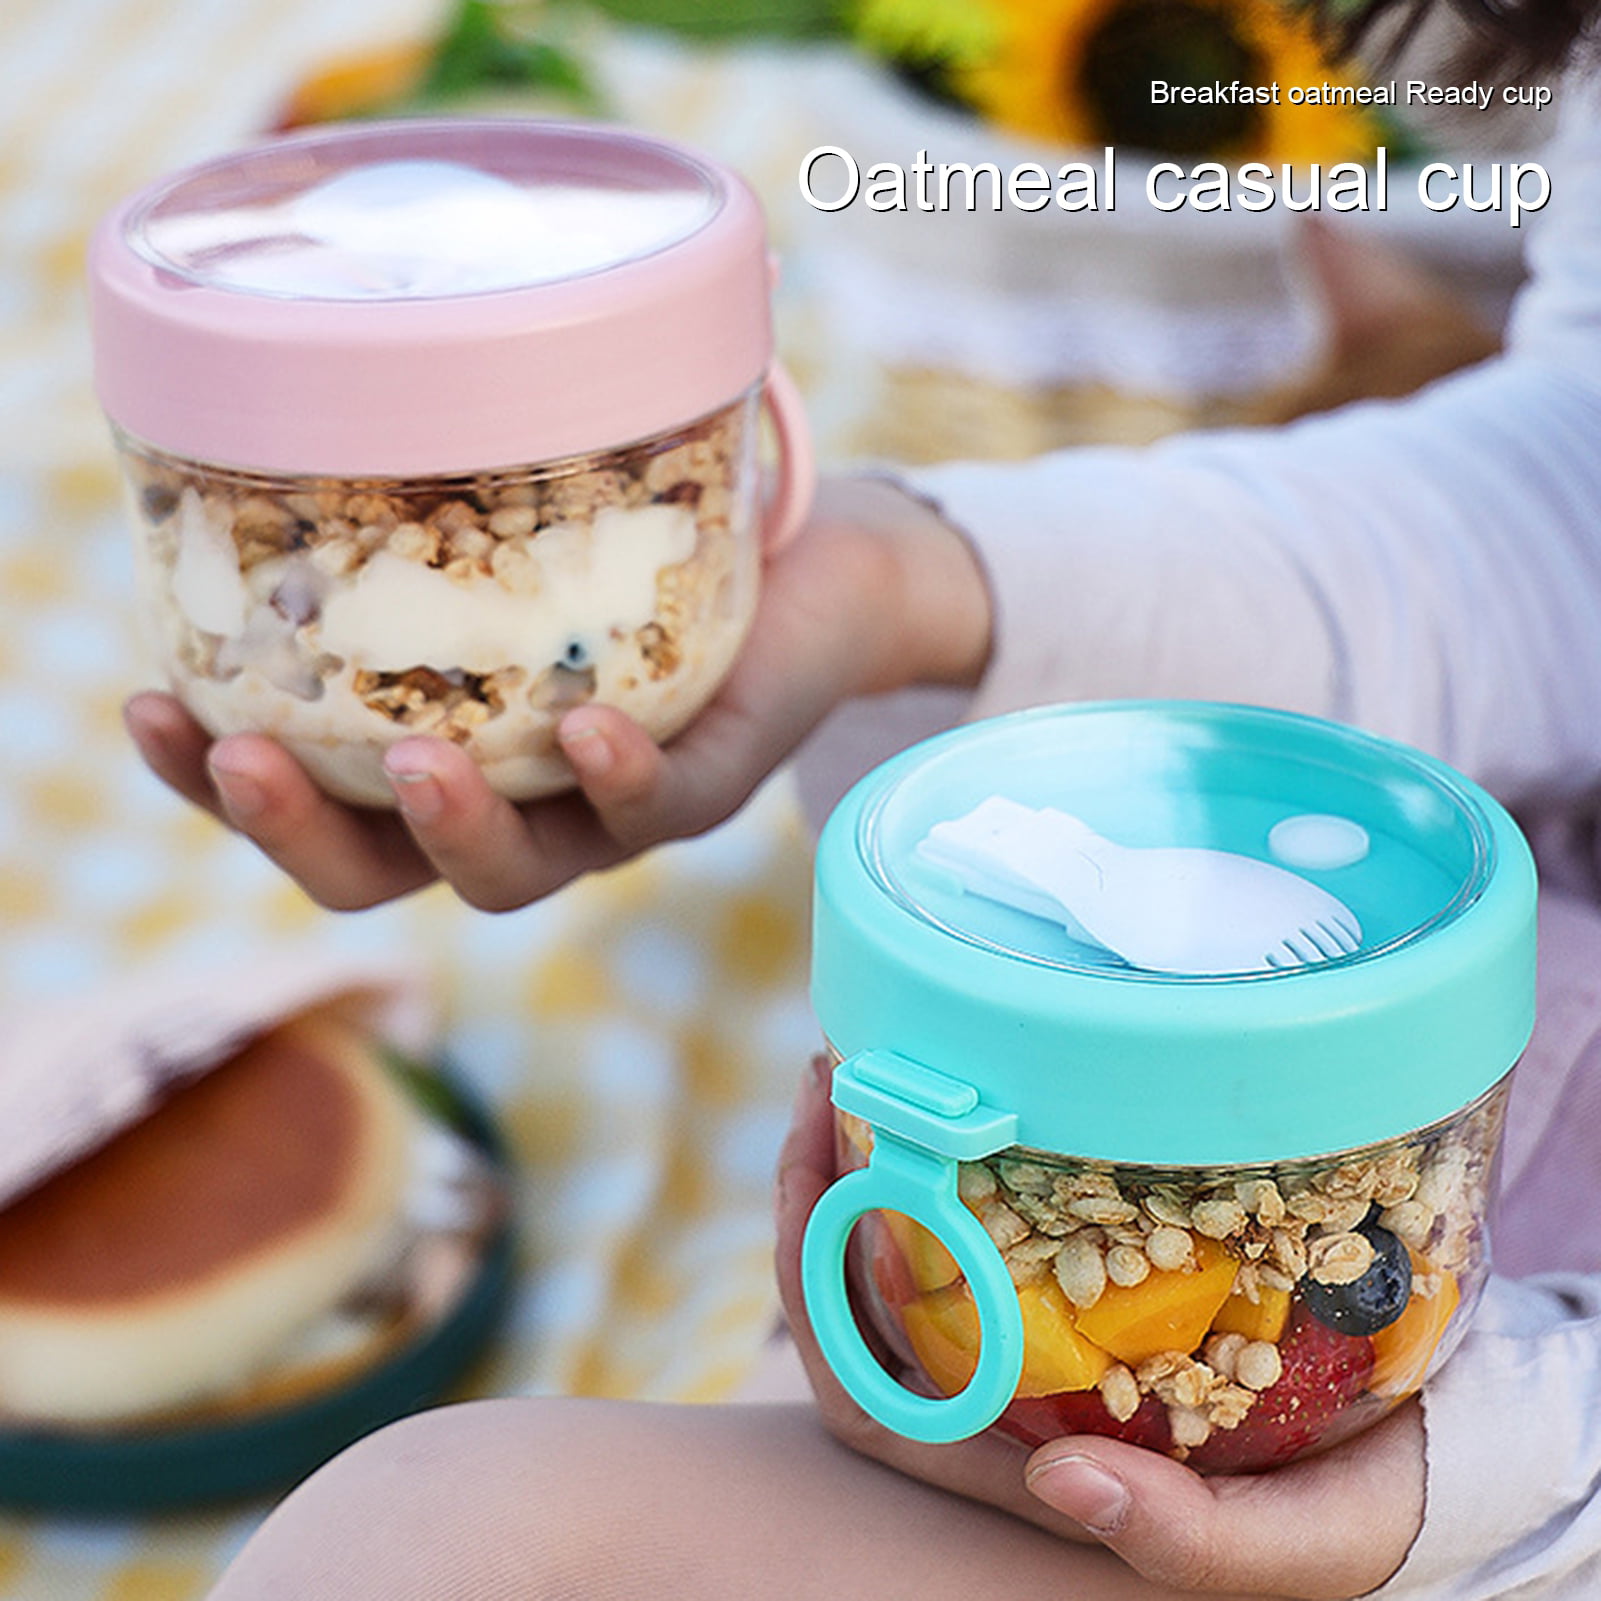 Overnight Oats Container Jar (2-Piece Set) - 18.5 oz Glass Containers with  Lids, Meal Prep Breakfast Containers, Portable Cereal and Milk Container, Oatmeal …